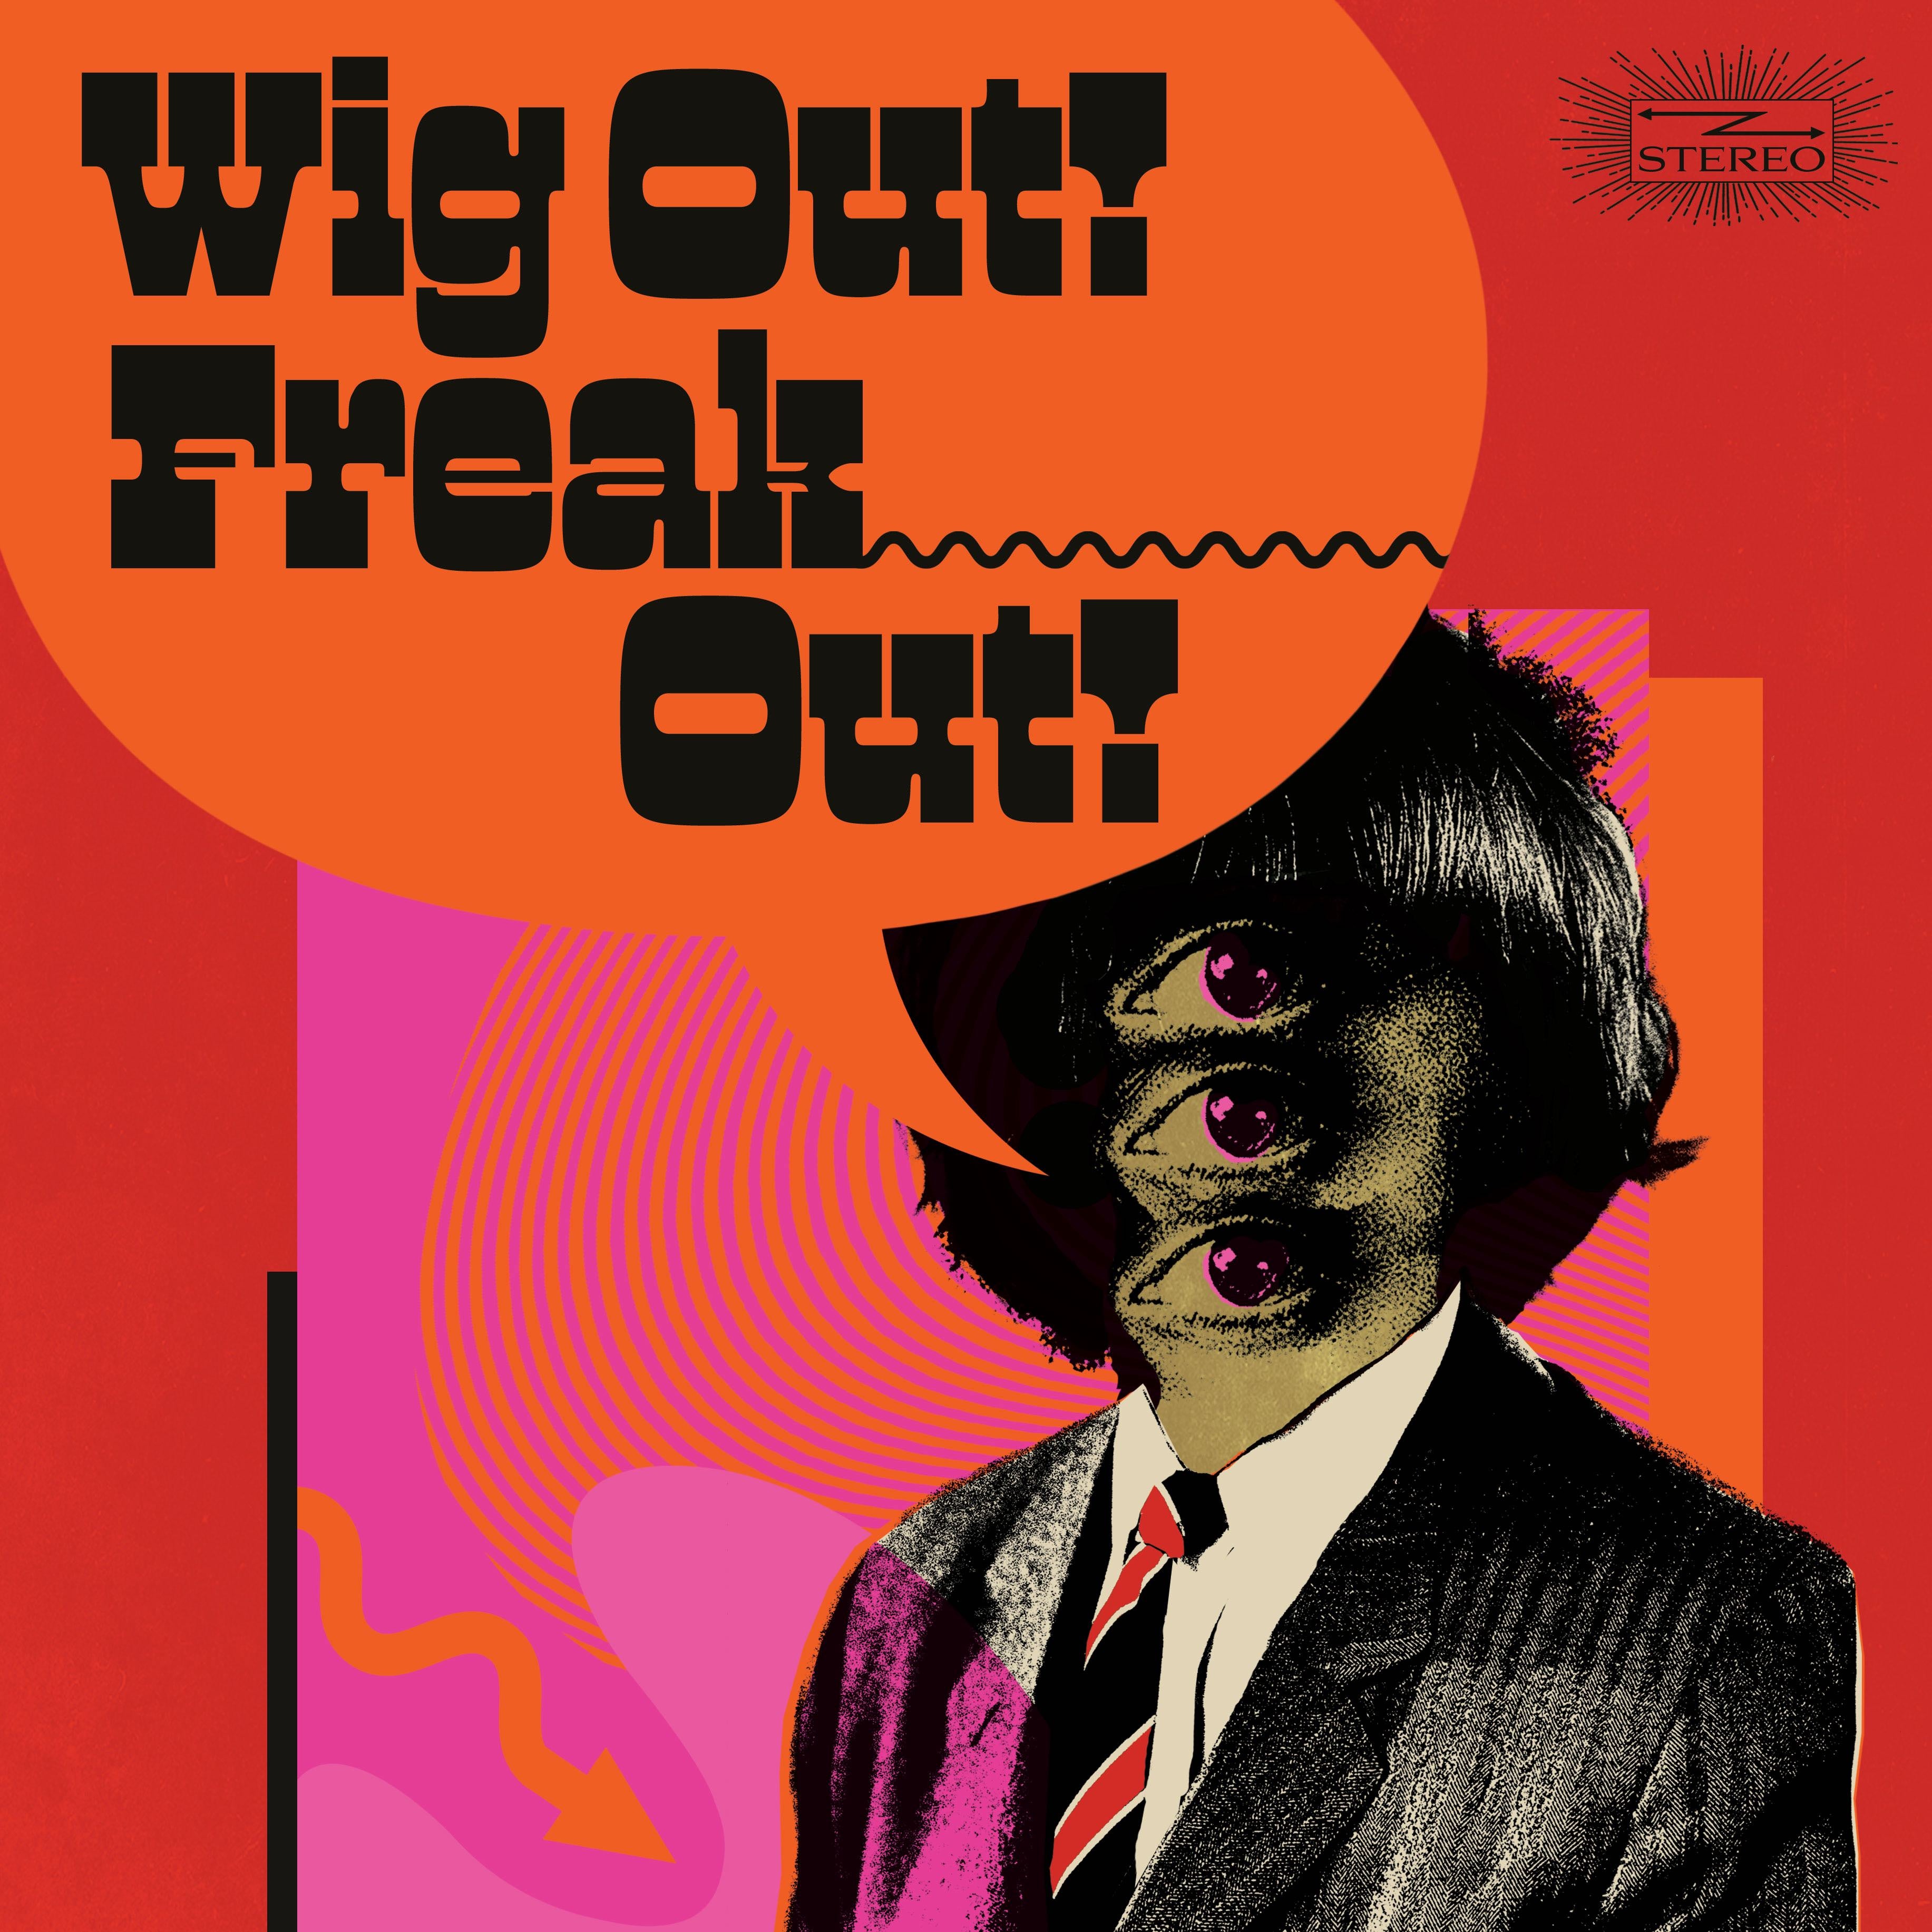 Various Artists - Wig Out! Freak Out! (Freakbeat & Mod Psychedelia Floorfillers 1964-1969): CD